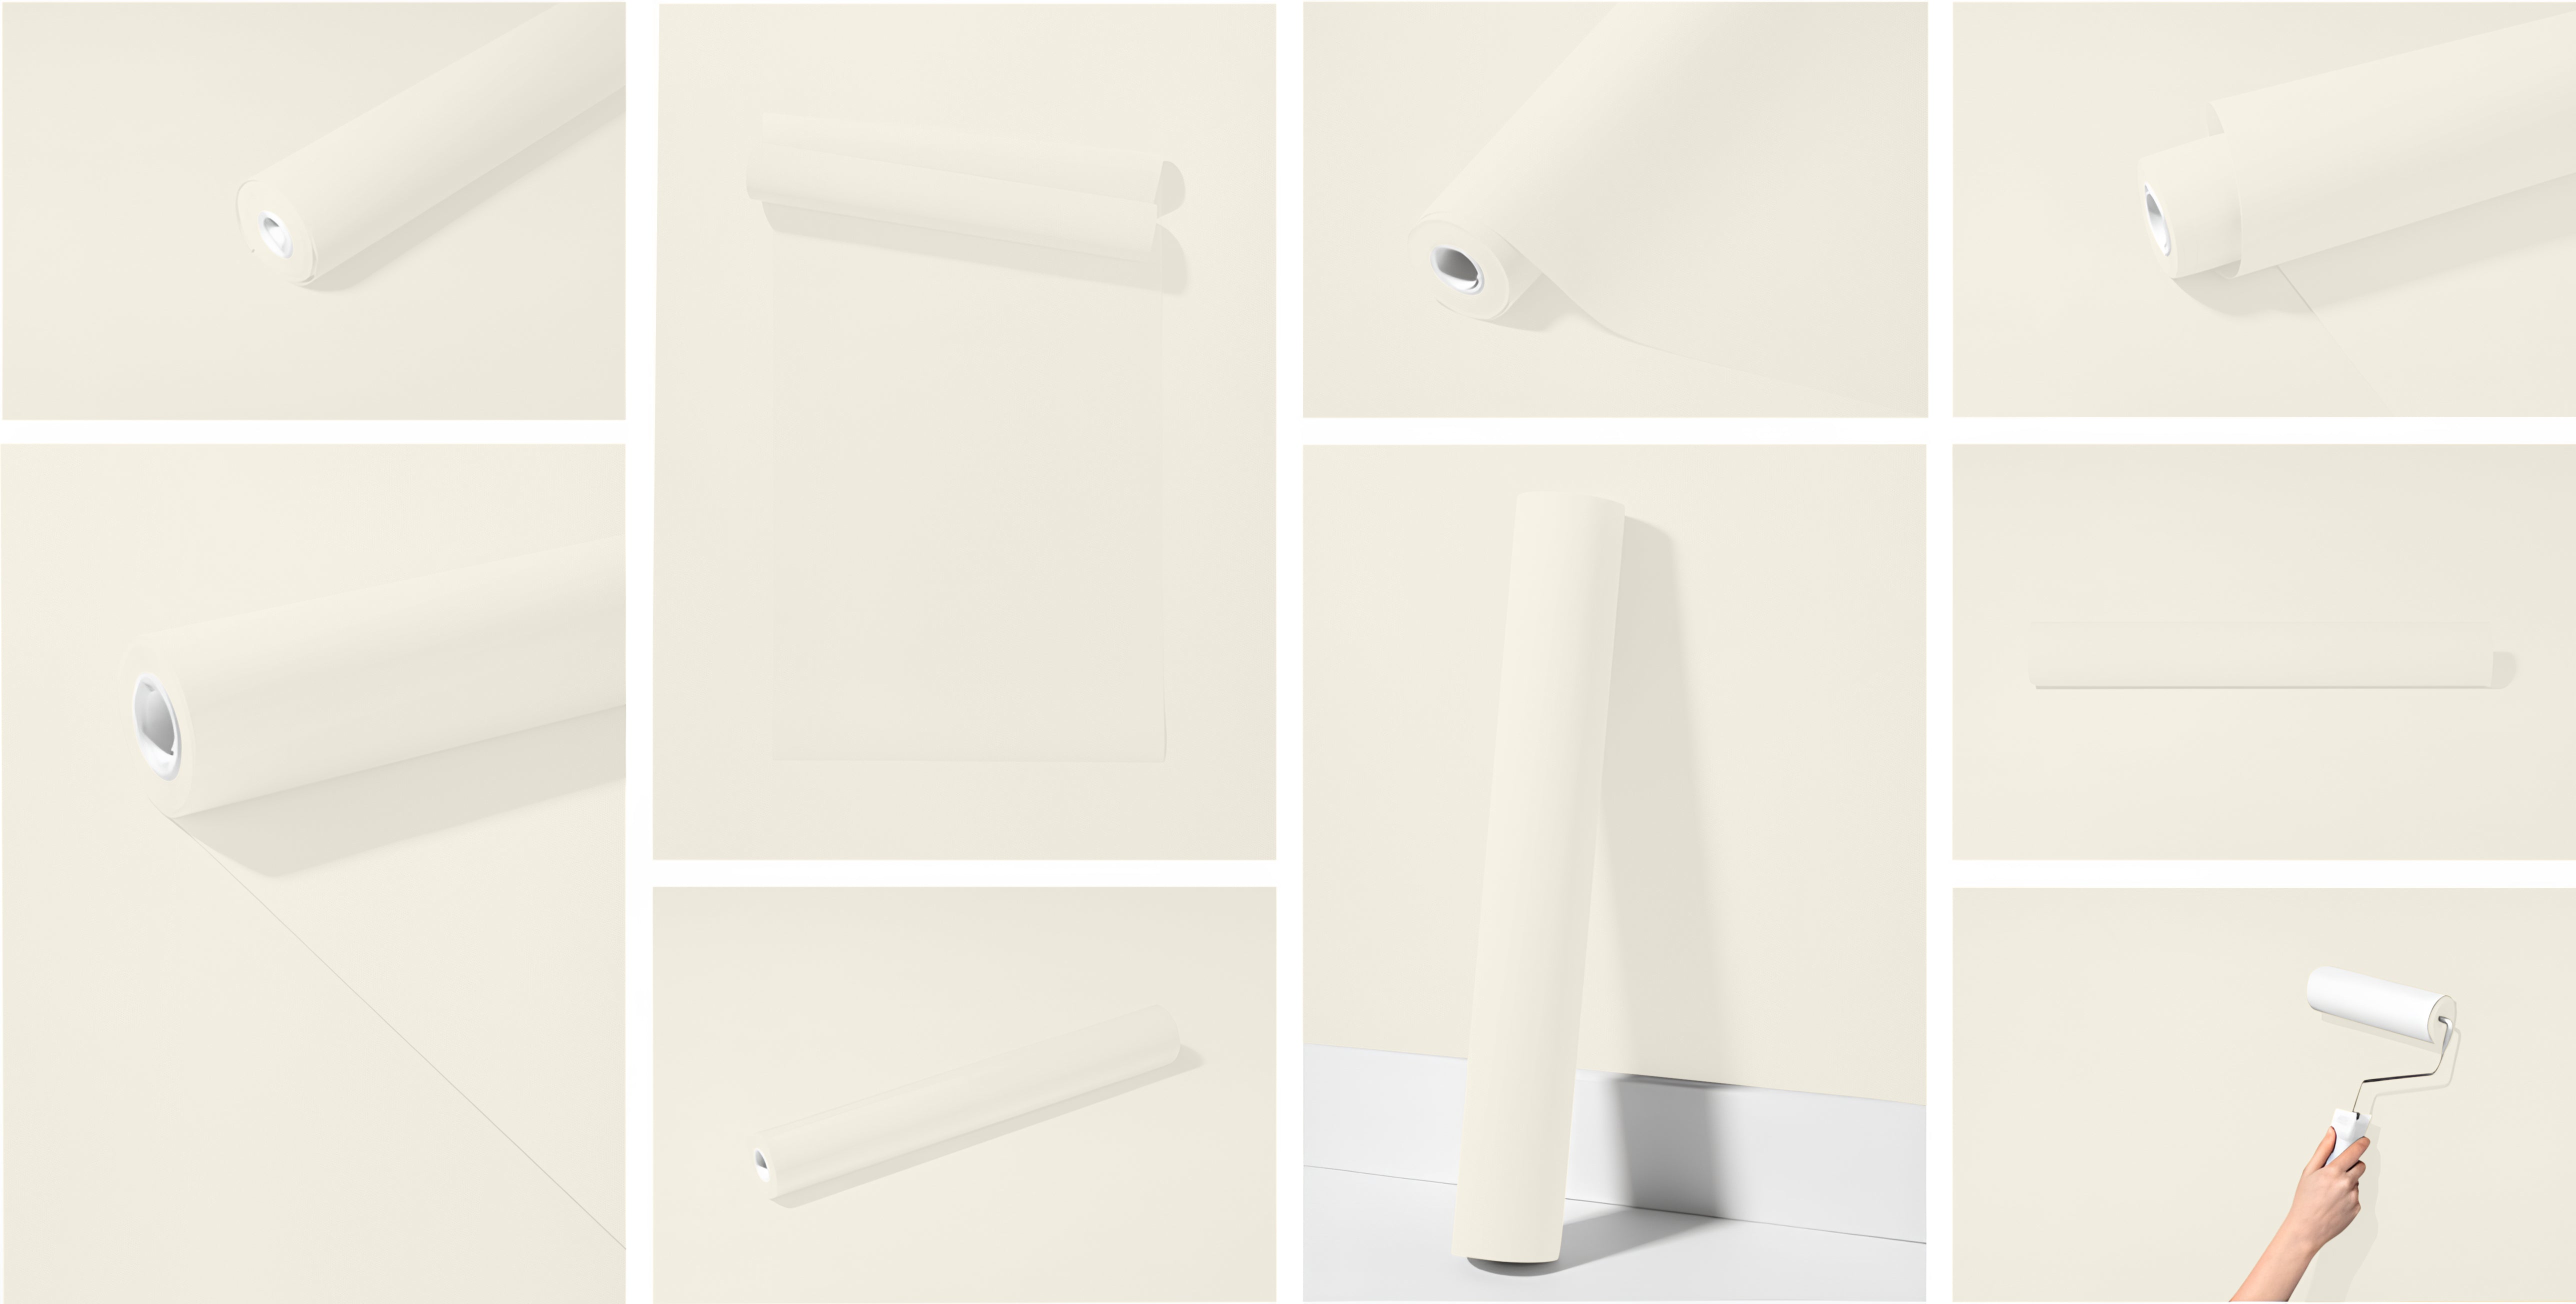 Peel & Stick Removable Re-usable Paint - Color RAL 9010 Pure White - offRAL™ - RALRAW LLC, USA